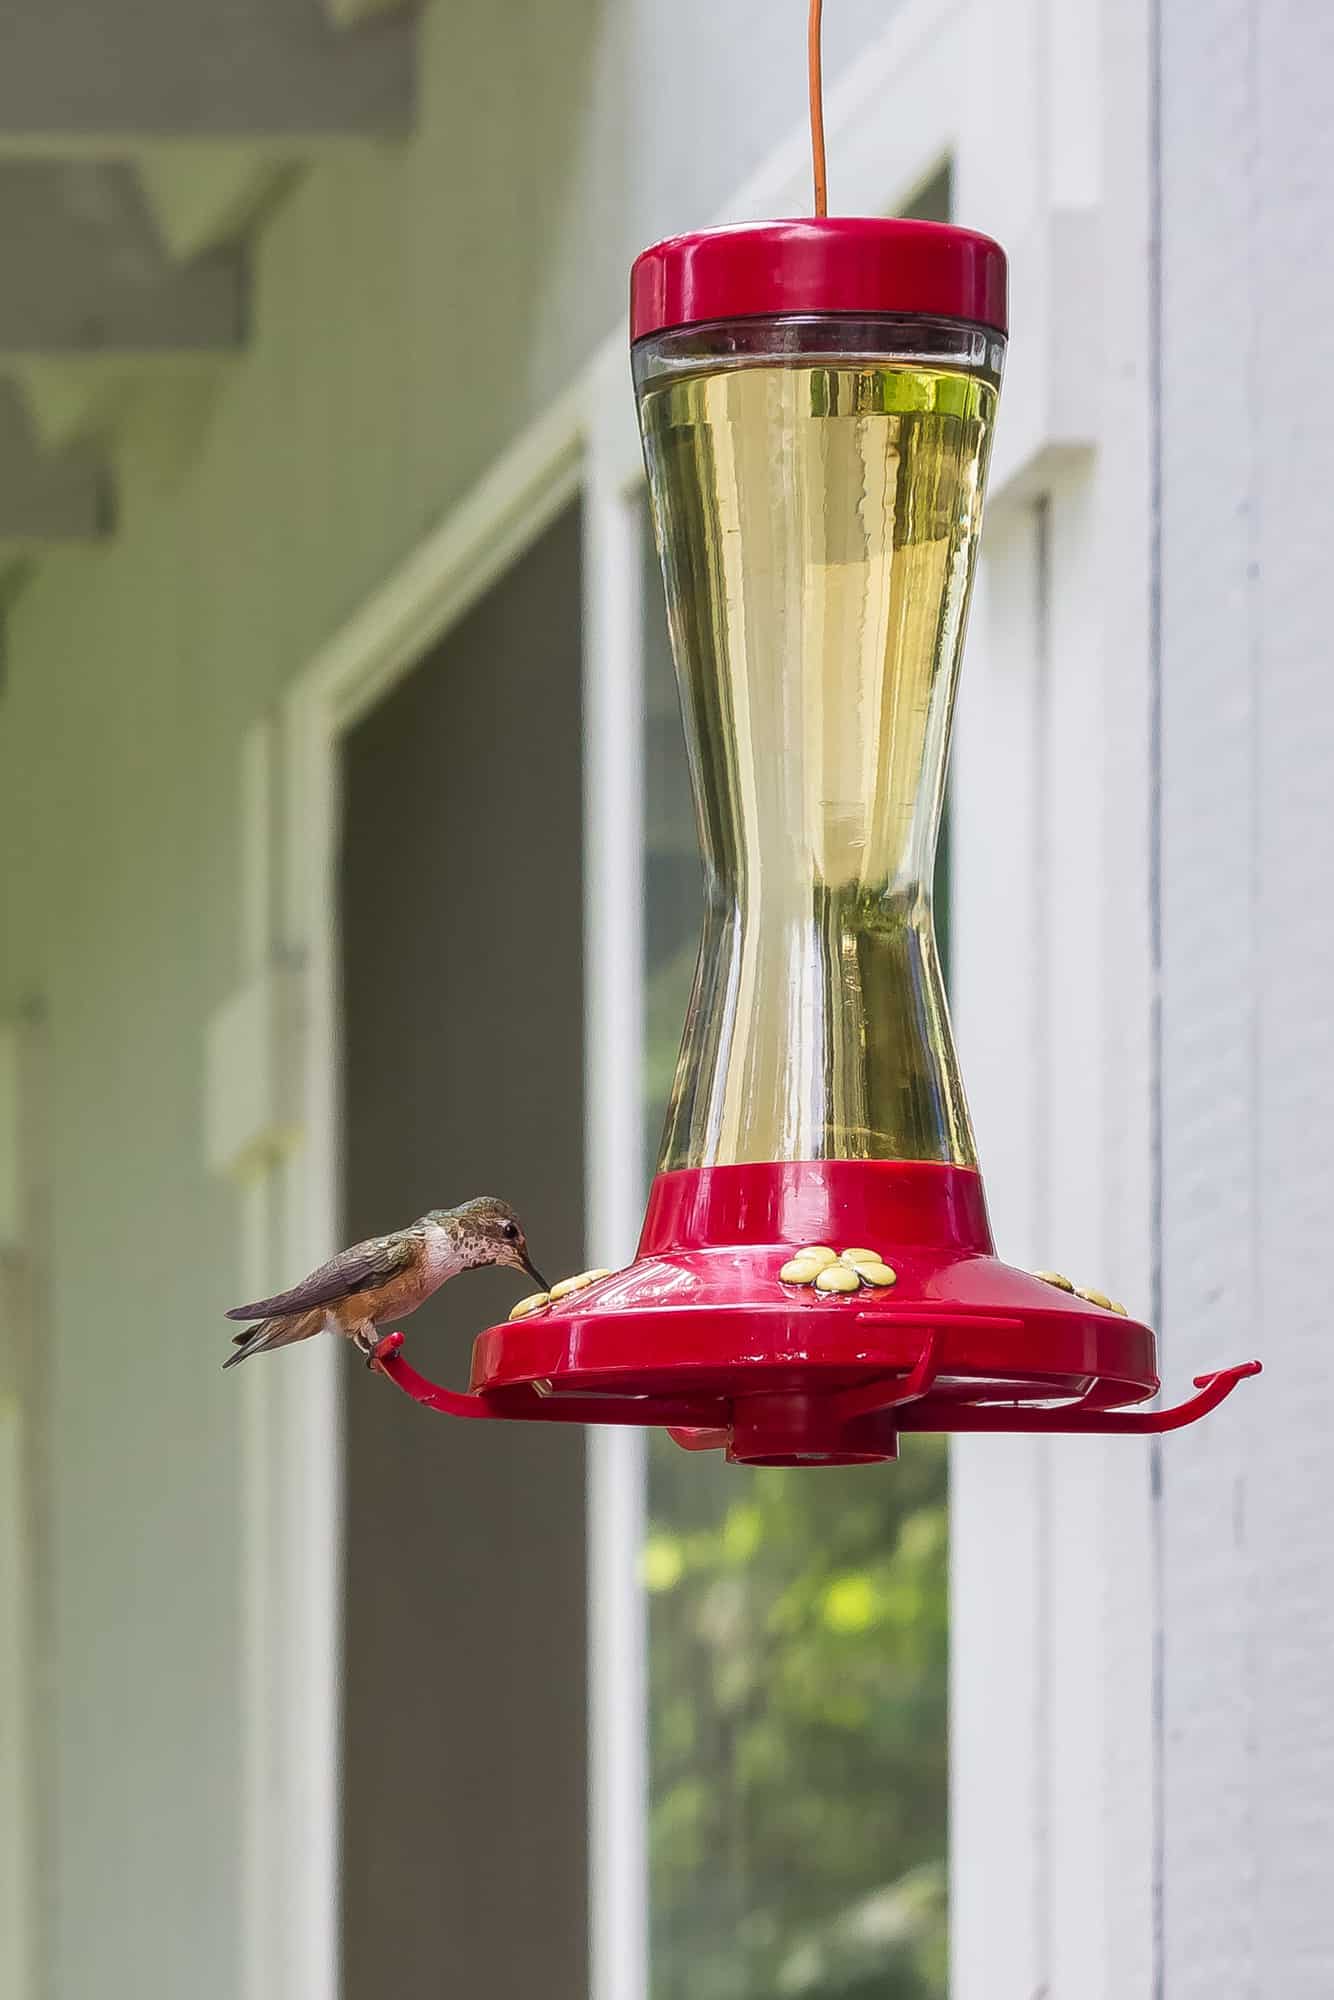 Make your own hummingbird food. It's easy, cheap and healthier for the birds! For the recipe and other helpful tips visit Made in a Pinch and follow us on Pinterest!1